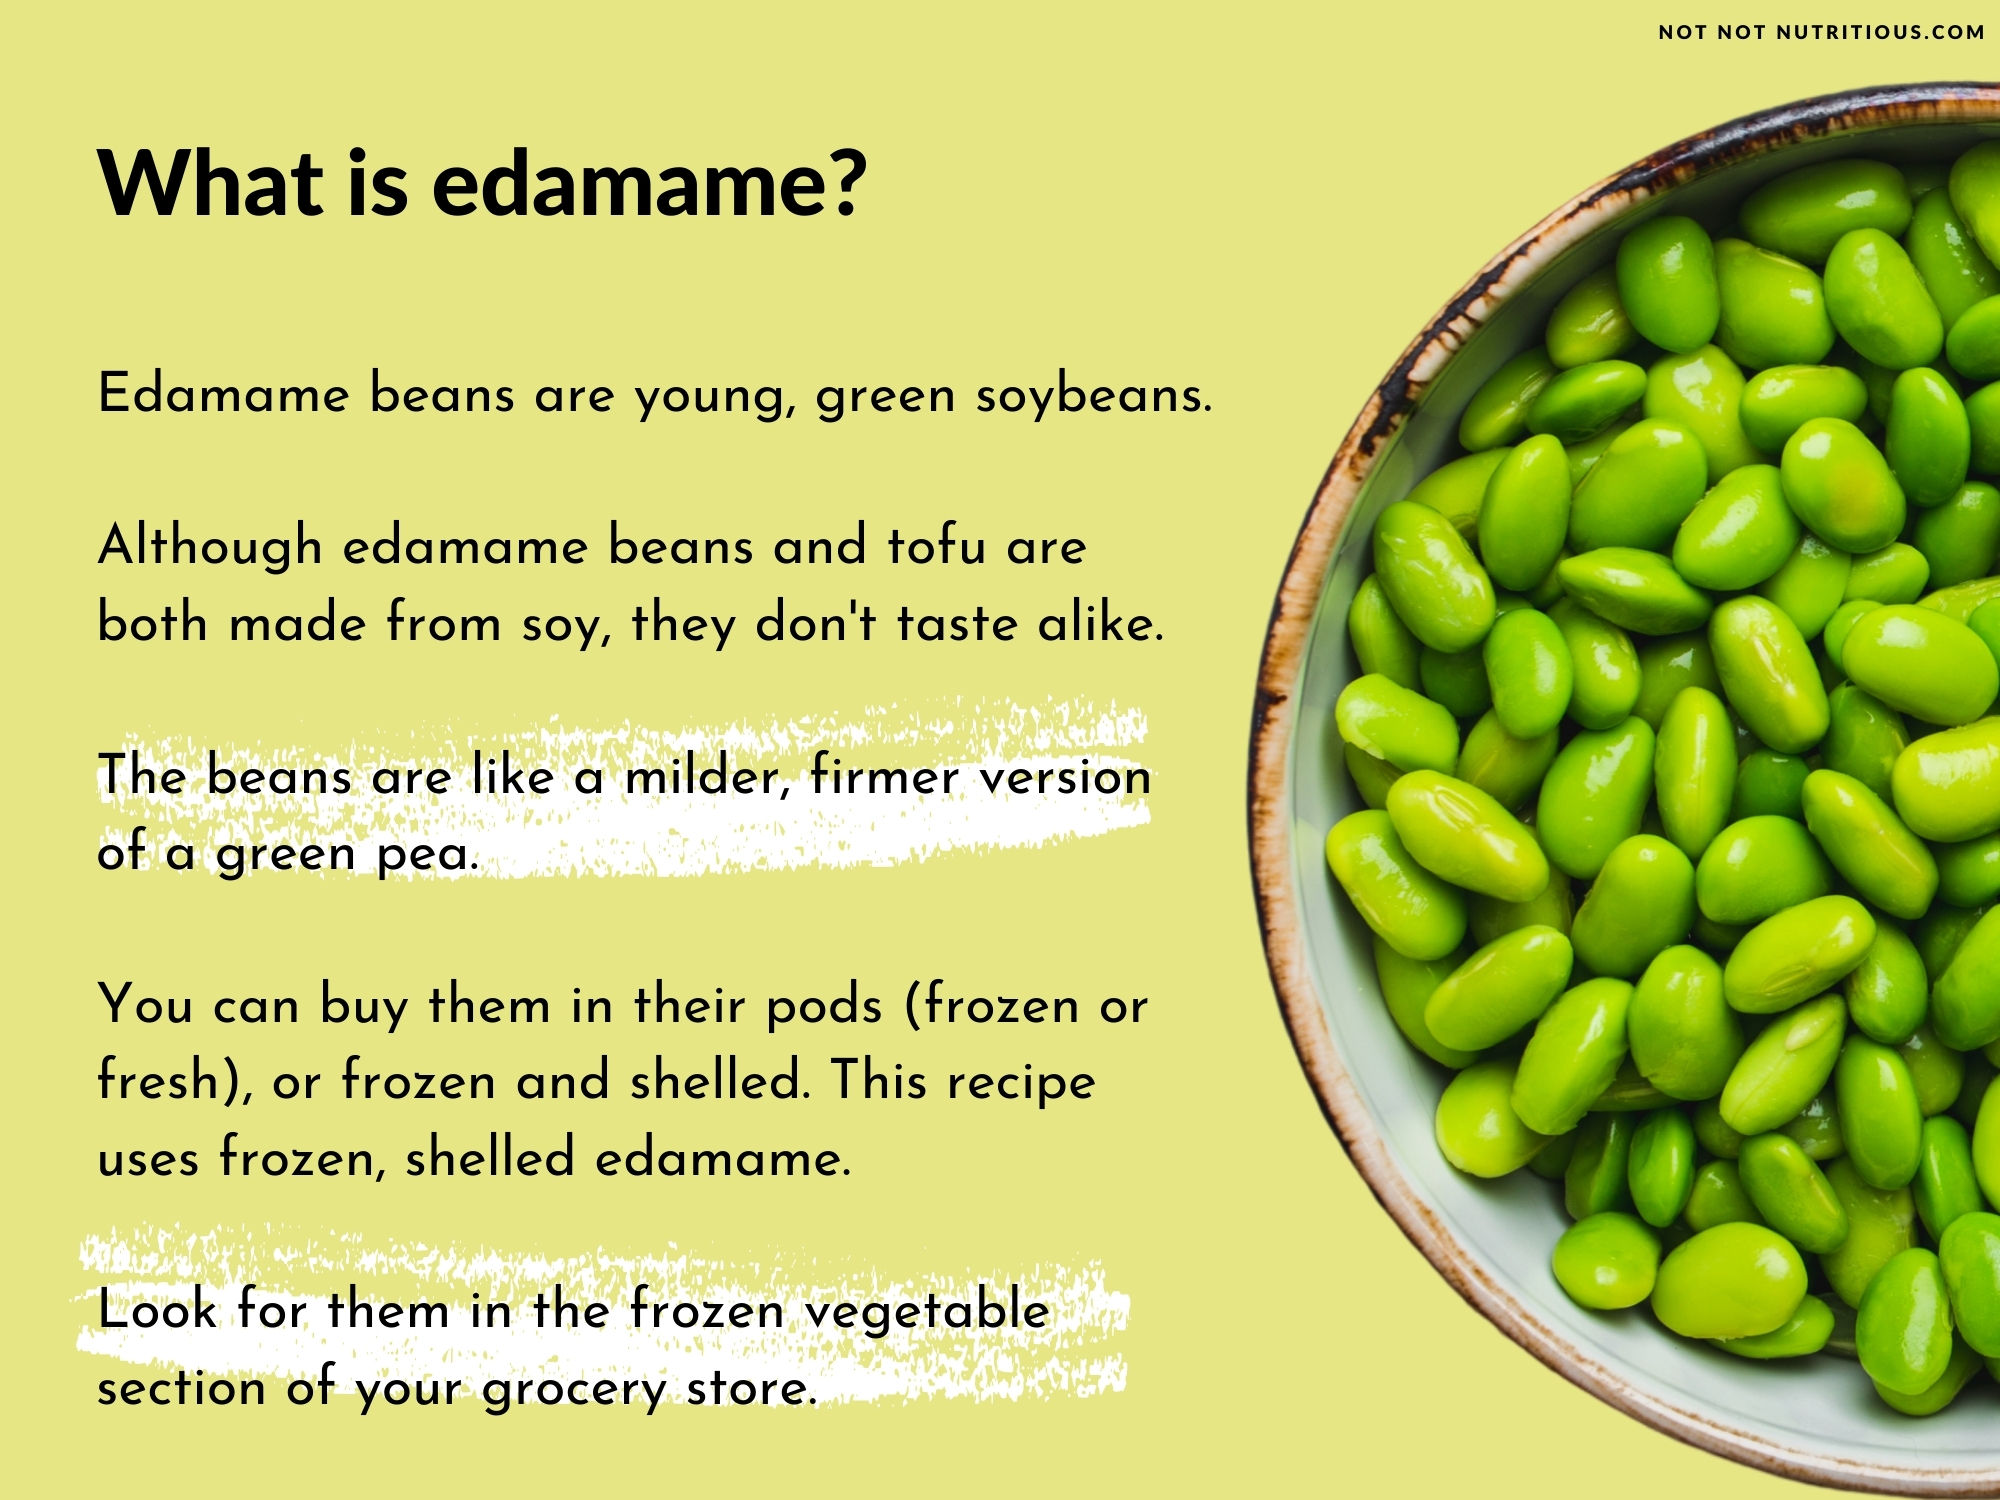 Infographic: What is edamame? A top-down view of edamame beans in a bowl. Text says: Edamame beans are young, green soybeans. Although edamame beans and tofu are both made from soy, they don't taste alike. The beans are like a milder, firmer version of a green pea. You can buy them in their pods (frozen or fresh) or frozen and shelled. This recipe uses frozen, shelled edamame. Look for them in the frozen vegetable section of your grocery store. 